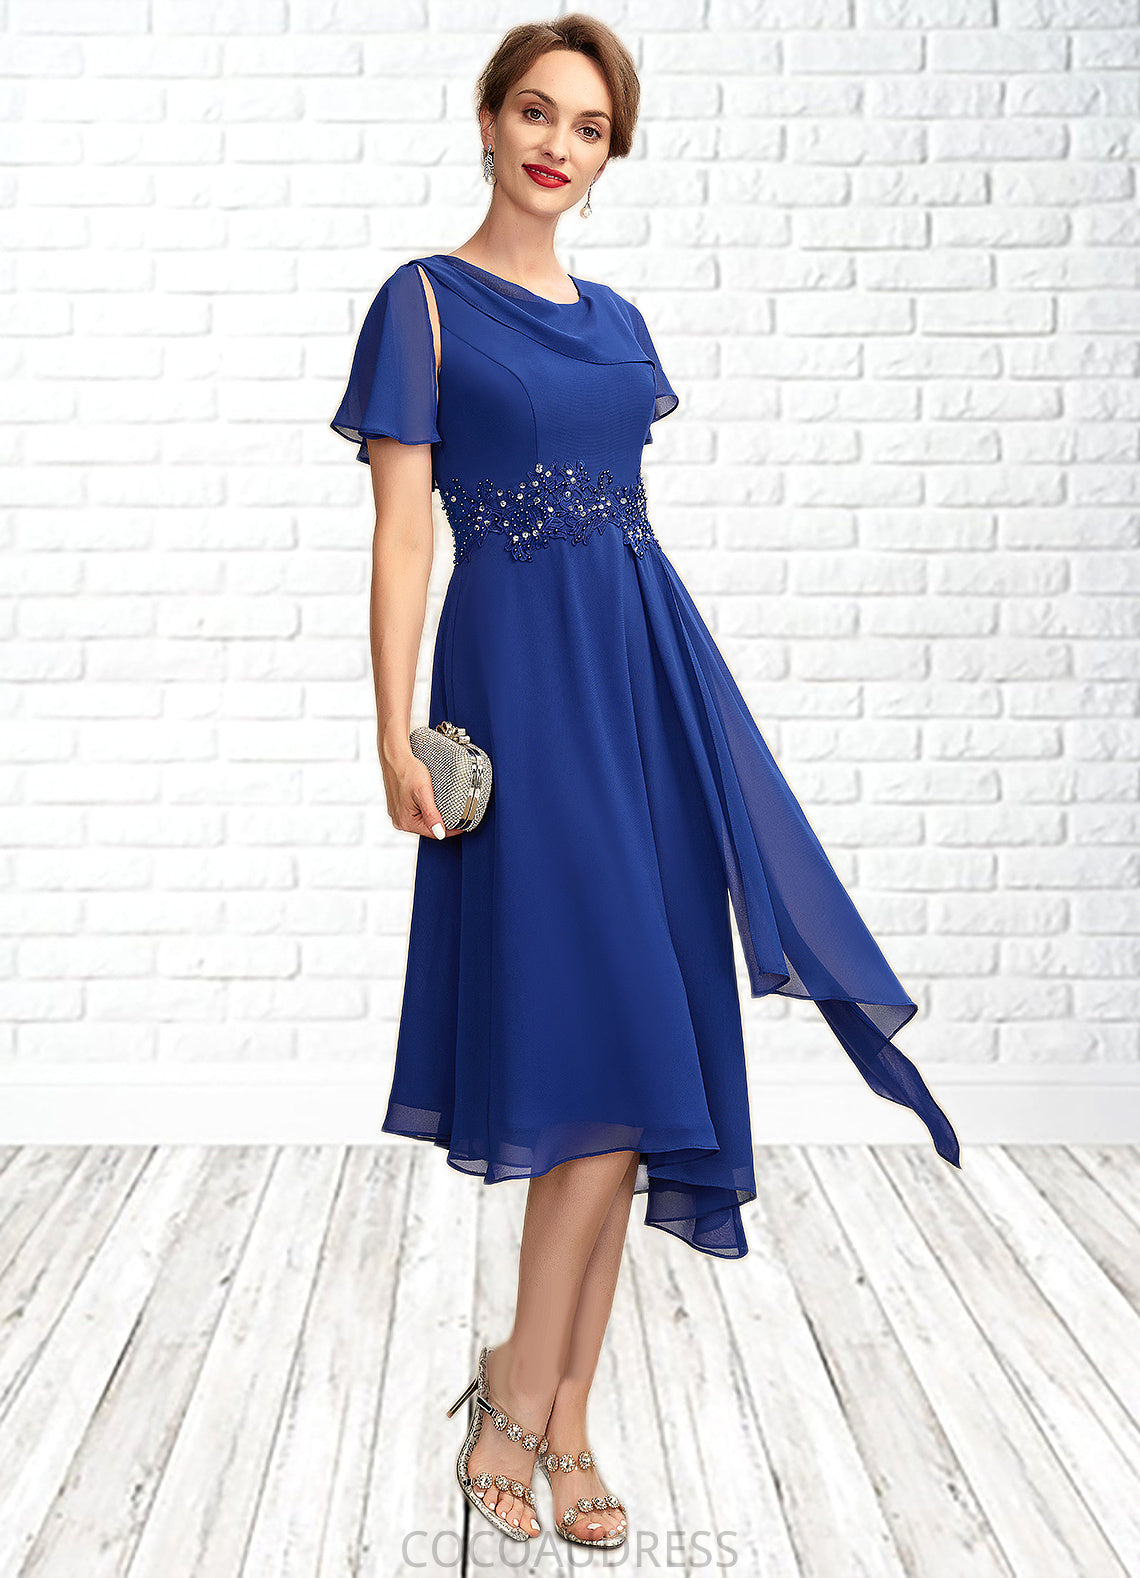 Anna A-Line Scoop Neck Asymmetrical Chiffon Mother of the Bride Dress With Beading Appliques Lace Cascading Ruffles 126P0014998